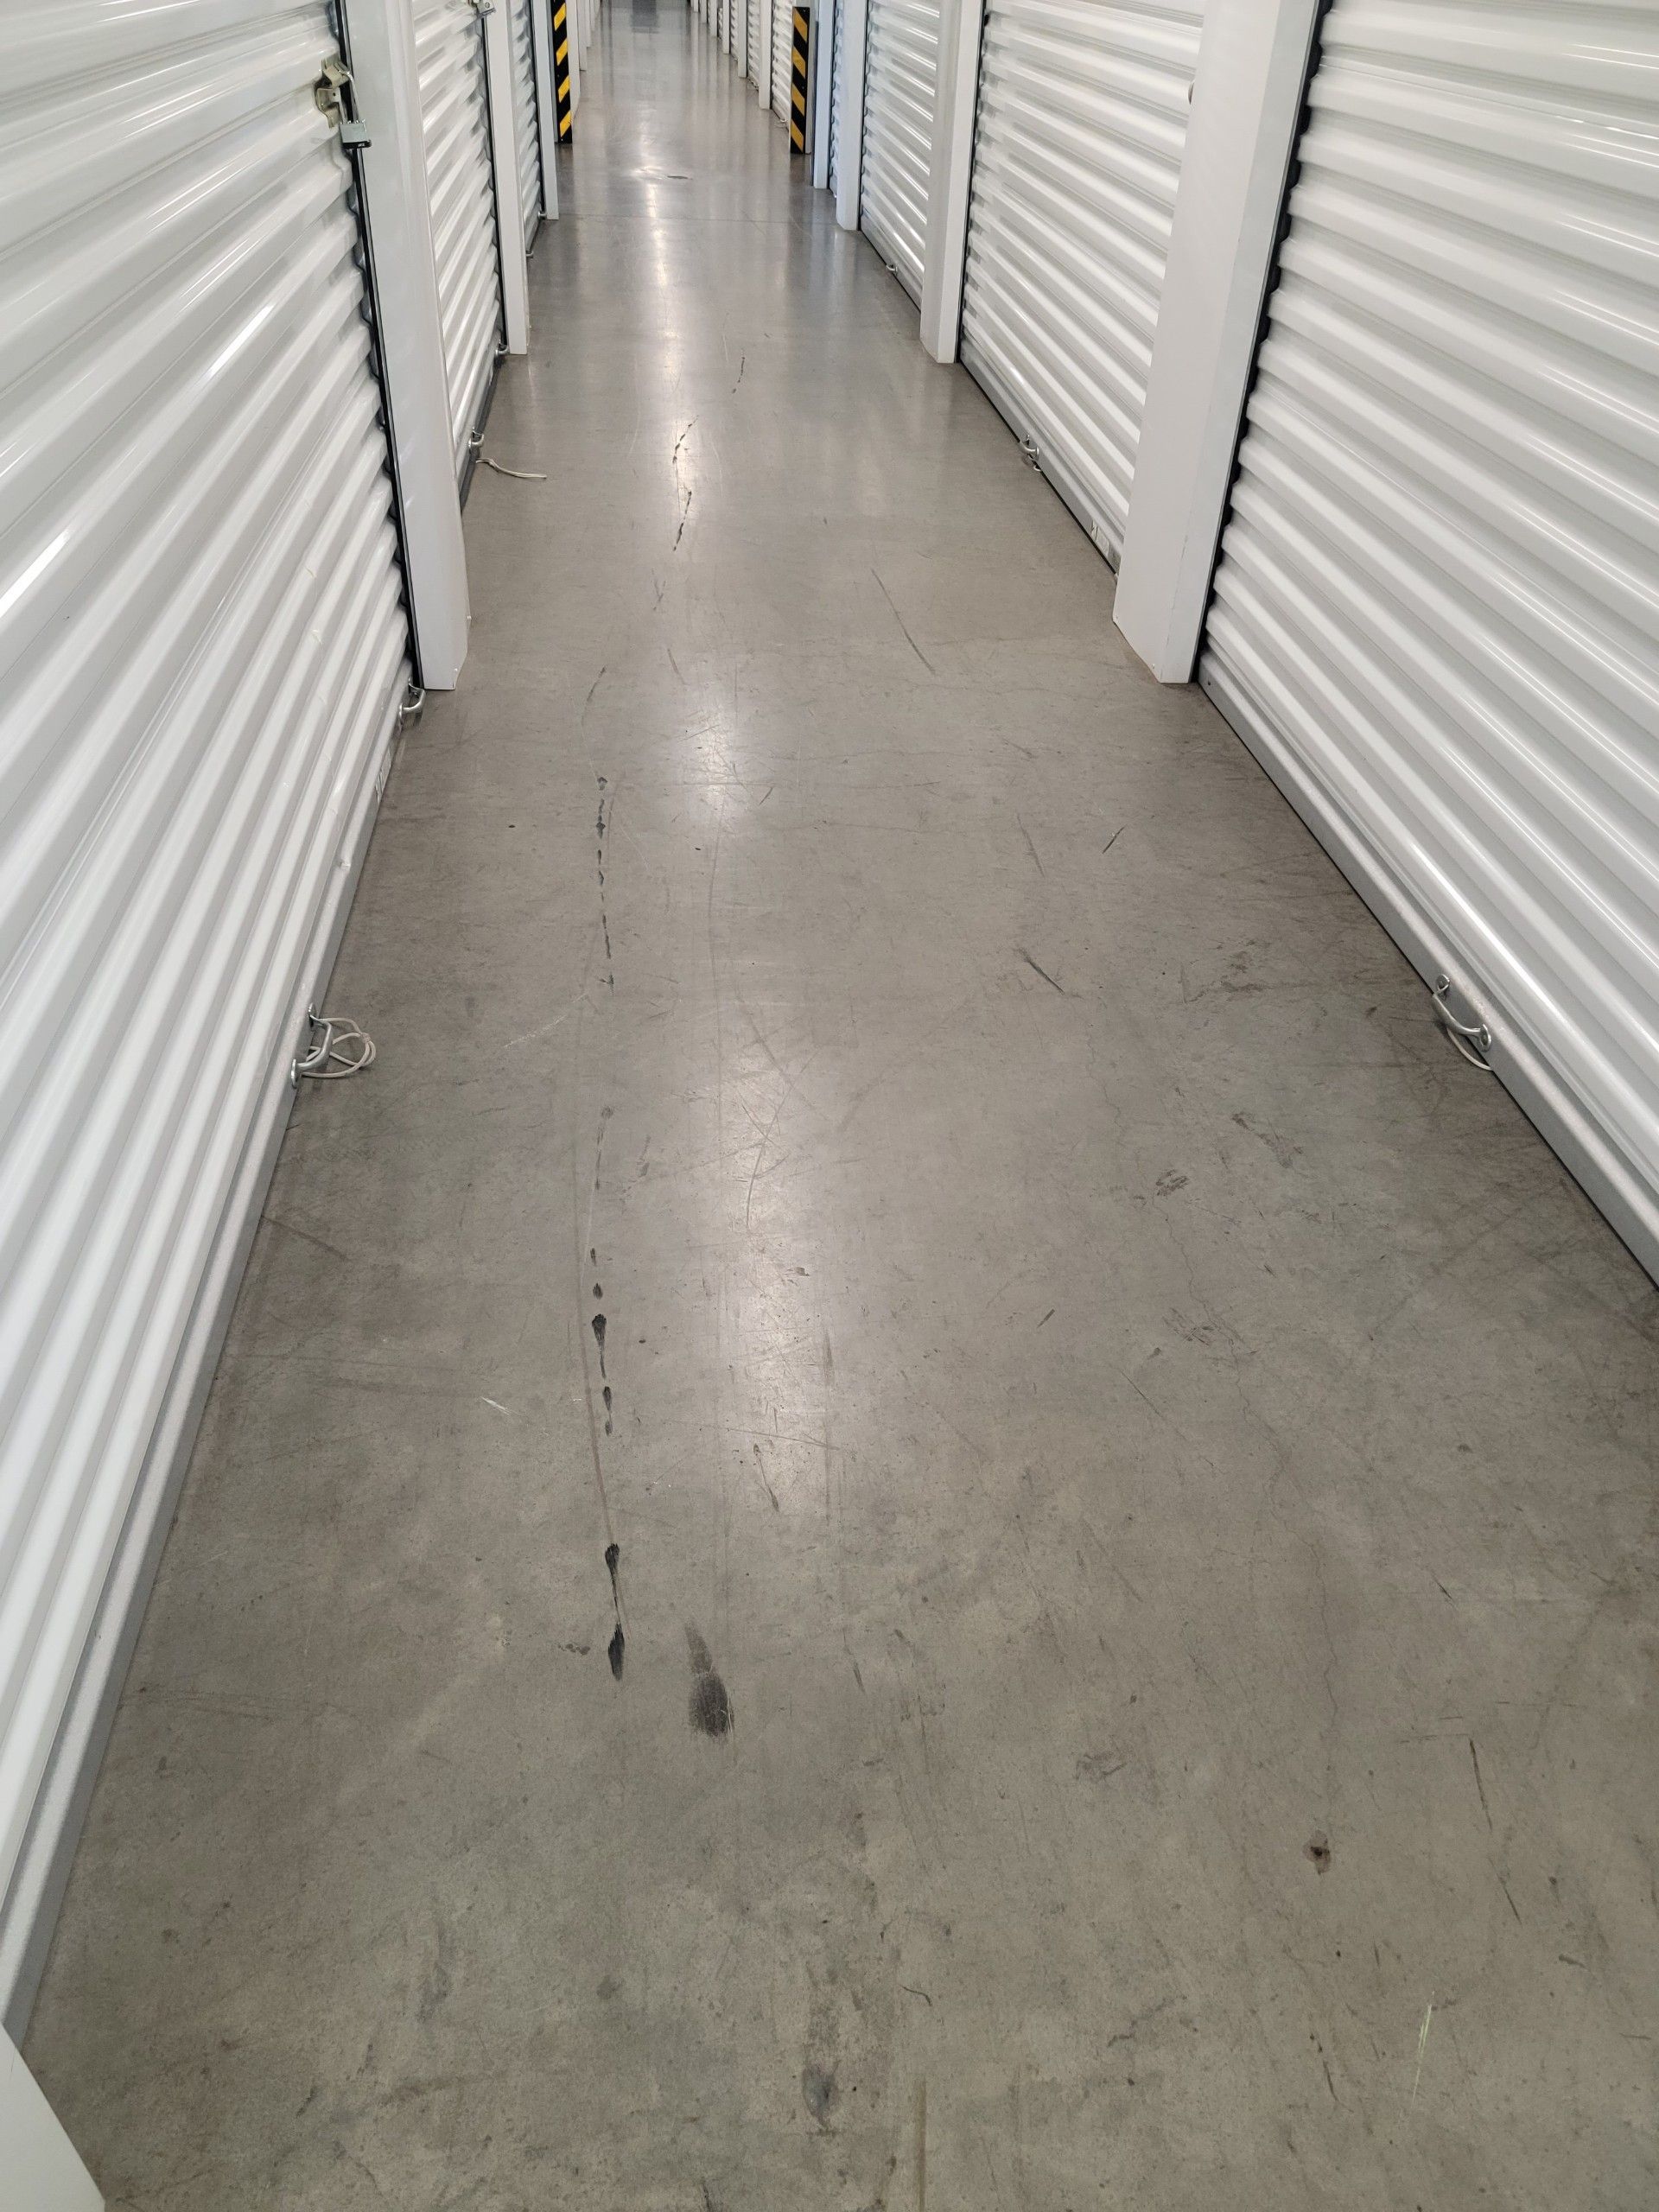 A long hallway with white shutters on the walls and a concrete floor.